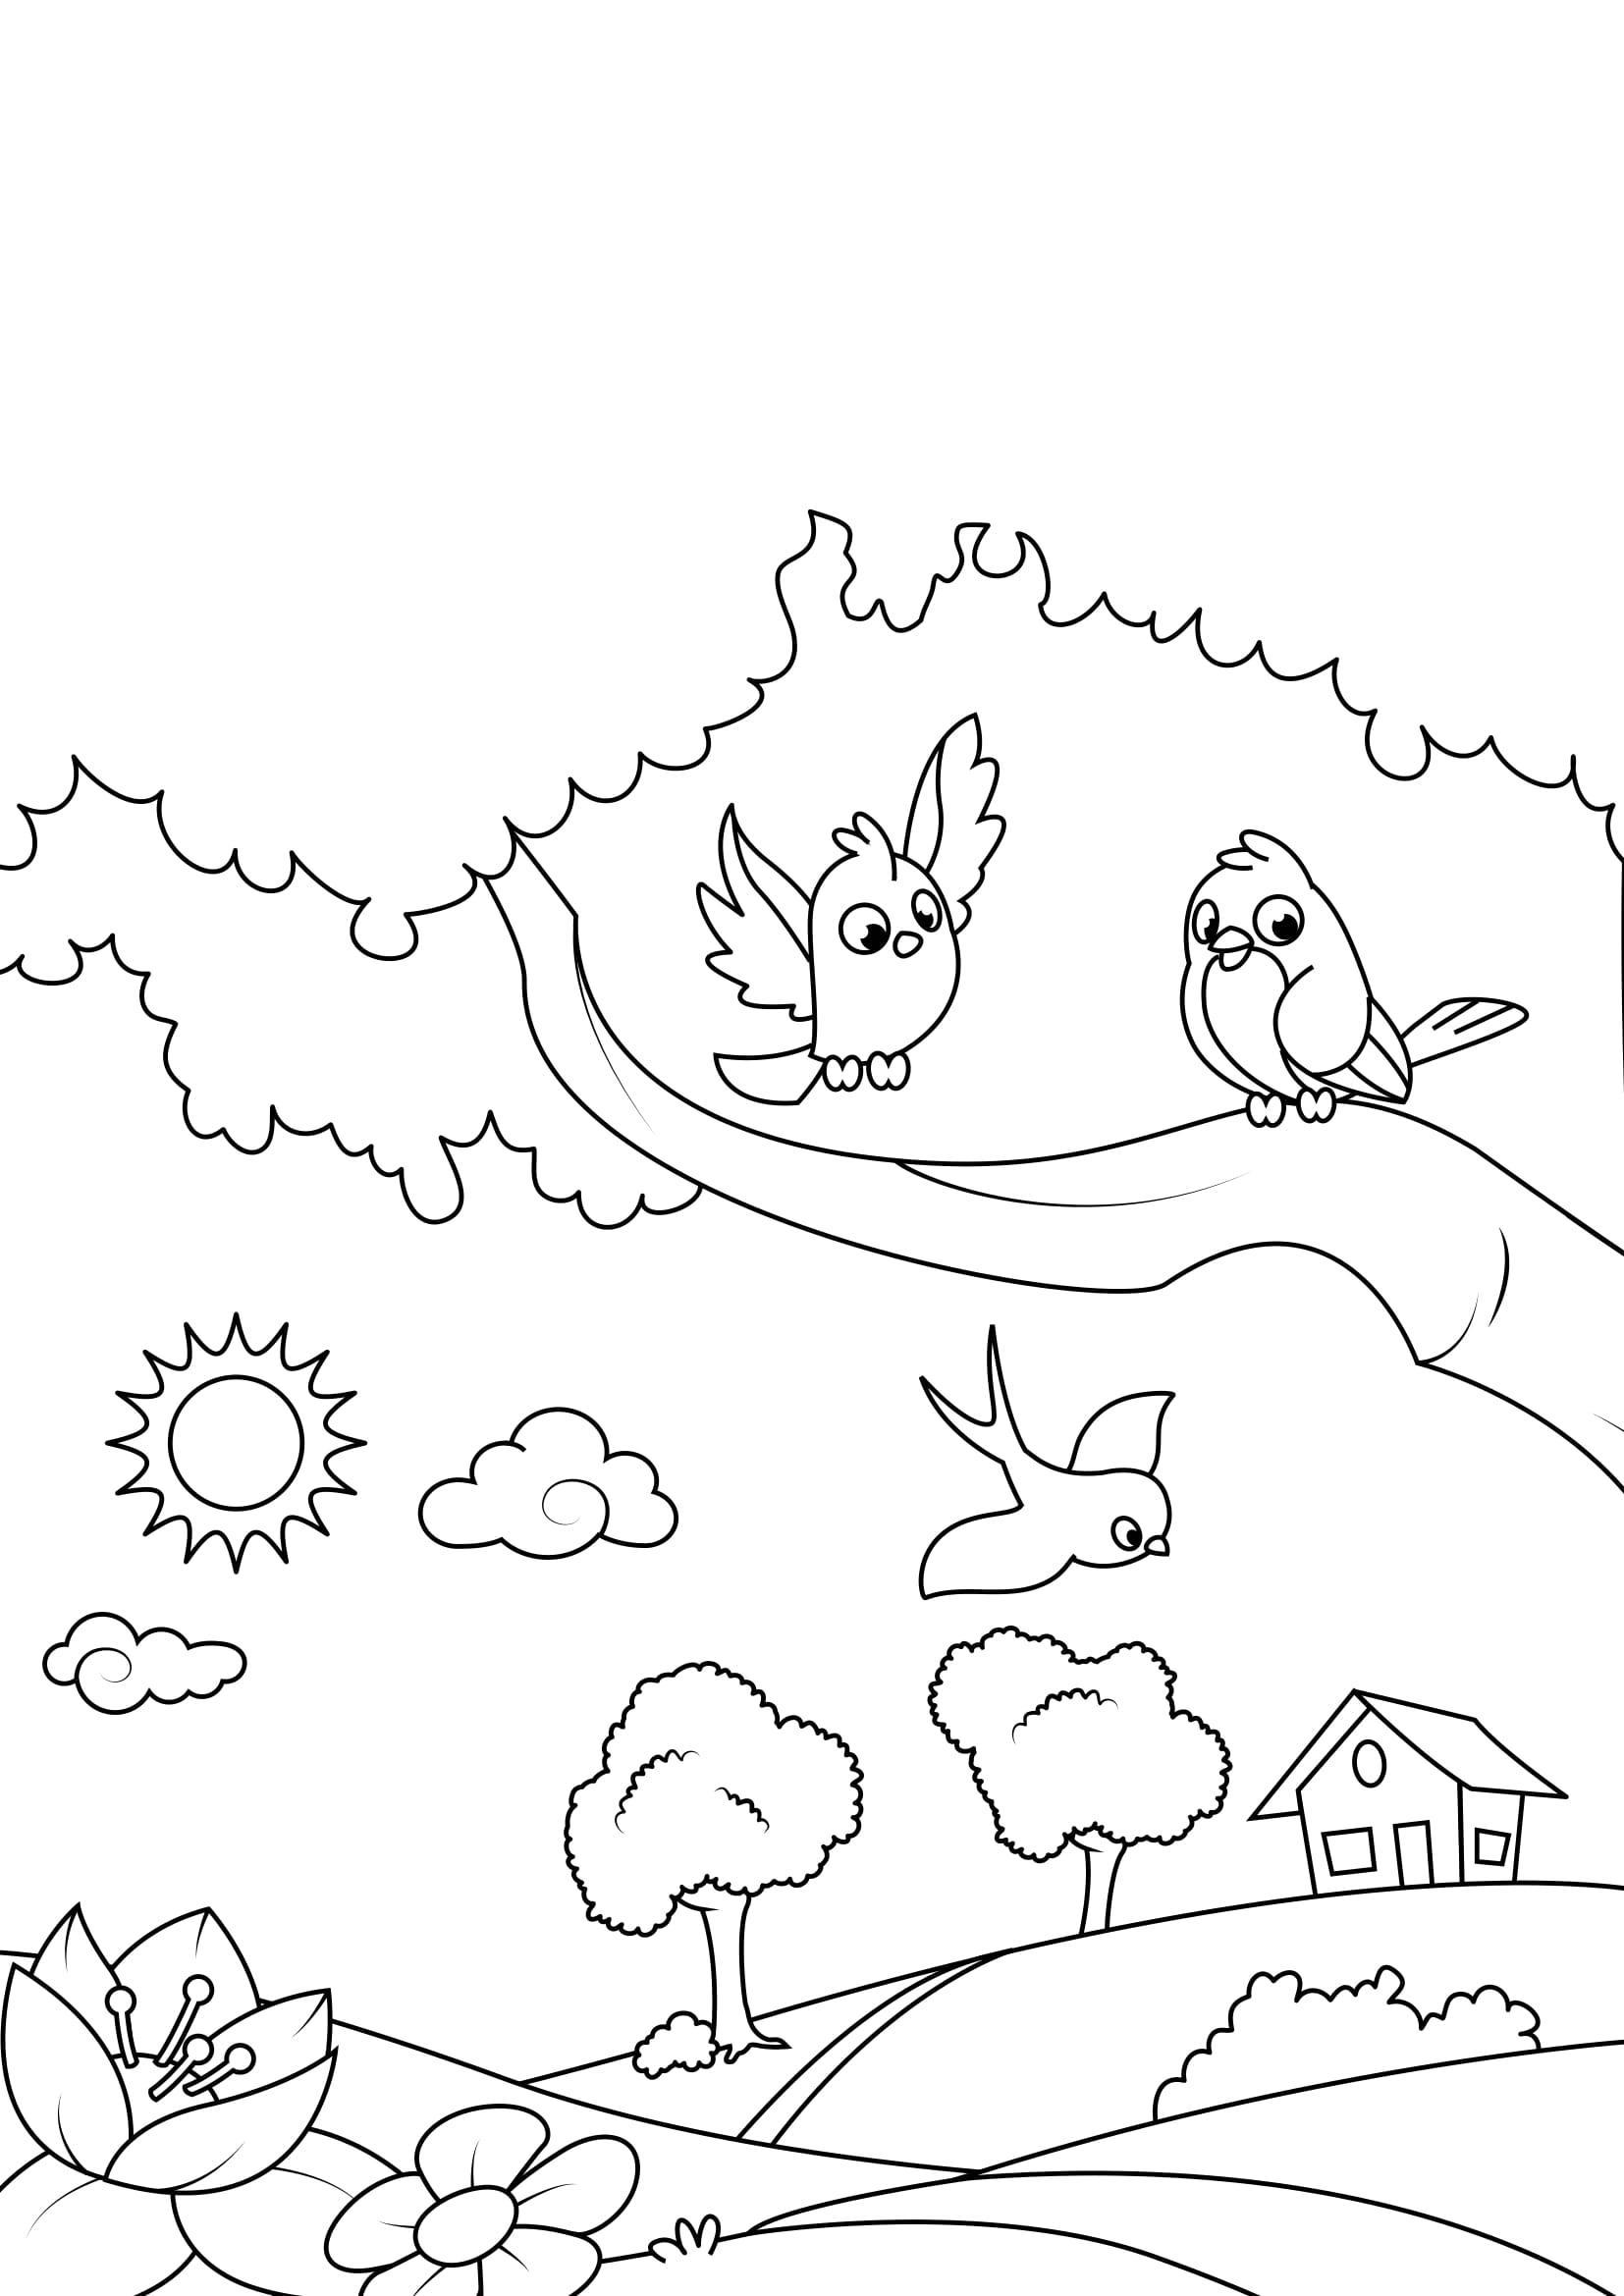 Coloring page spring, birds in the garden